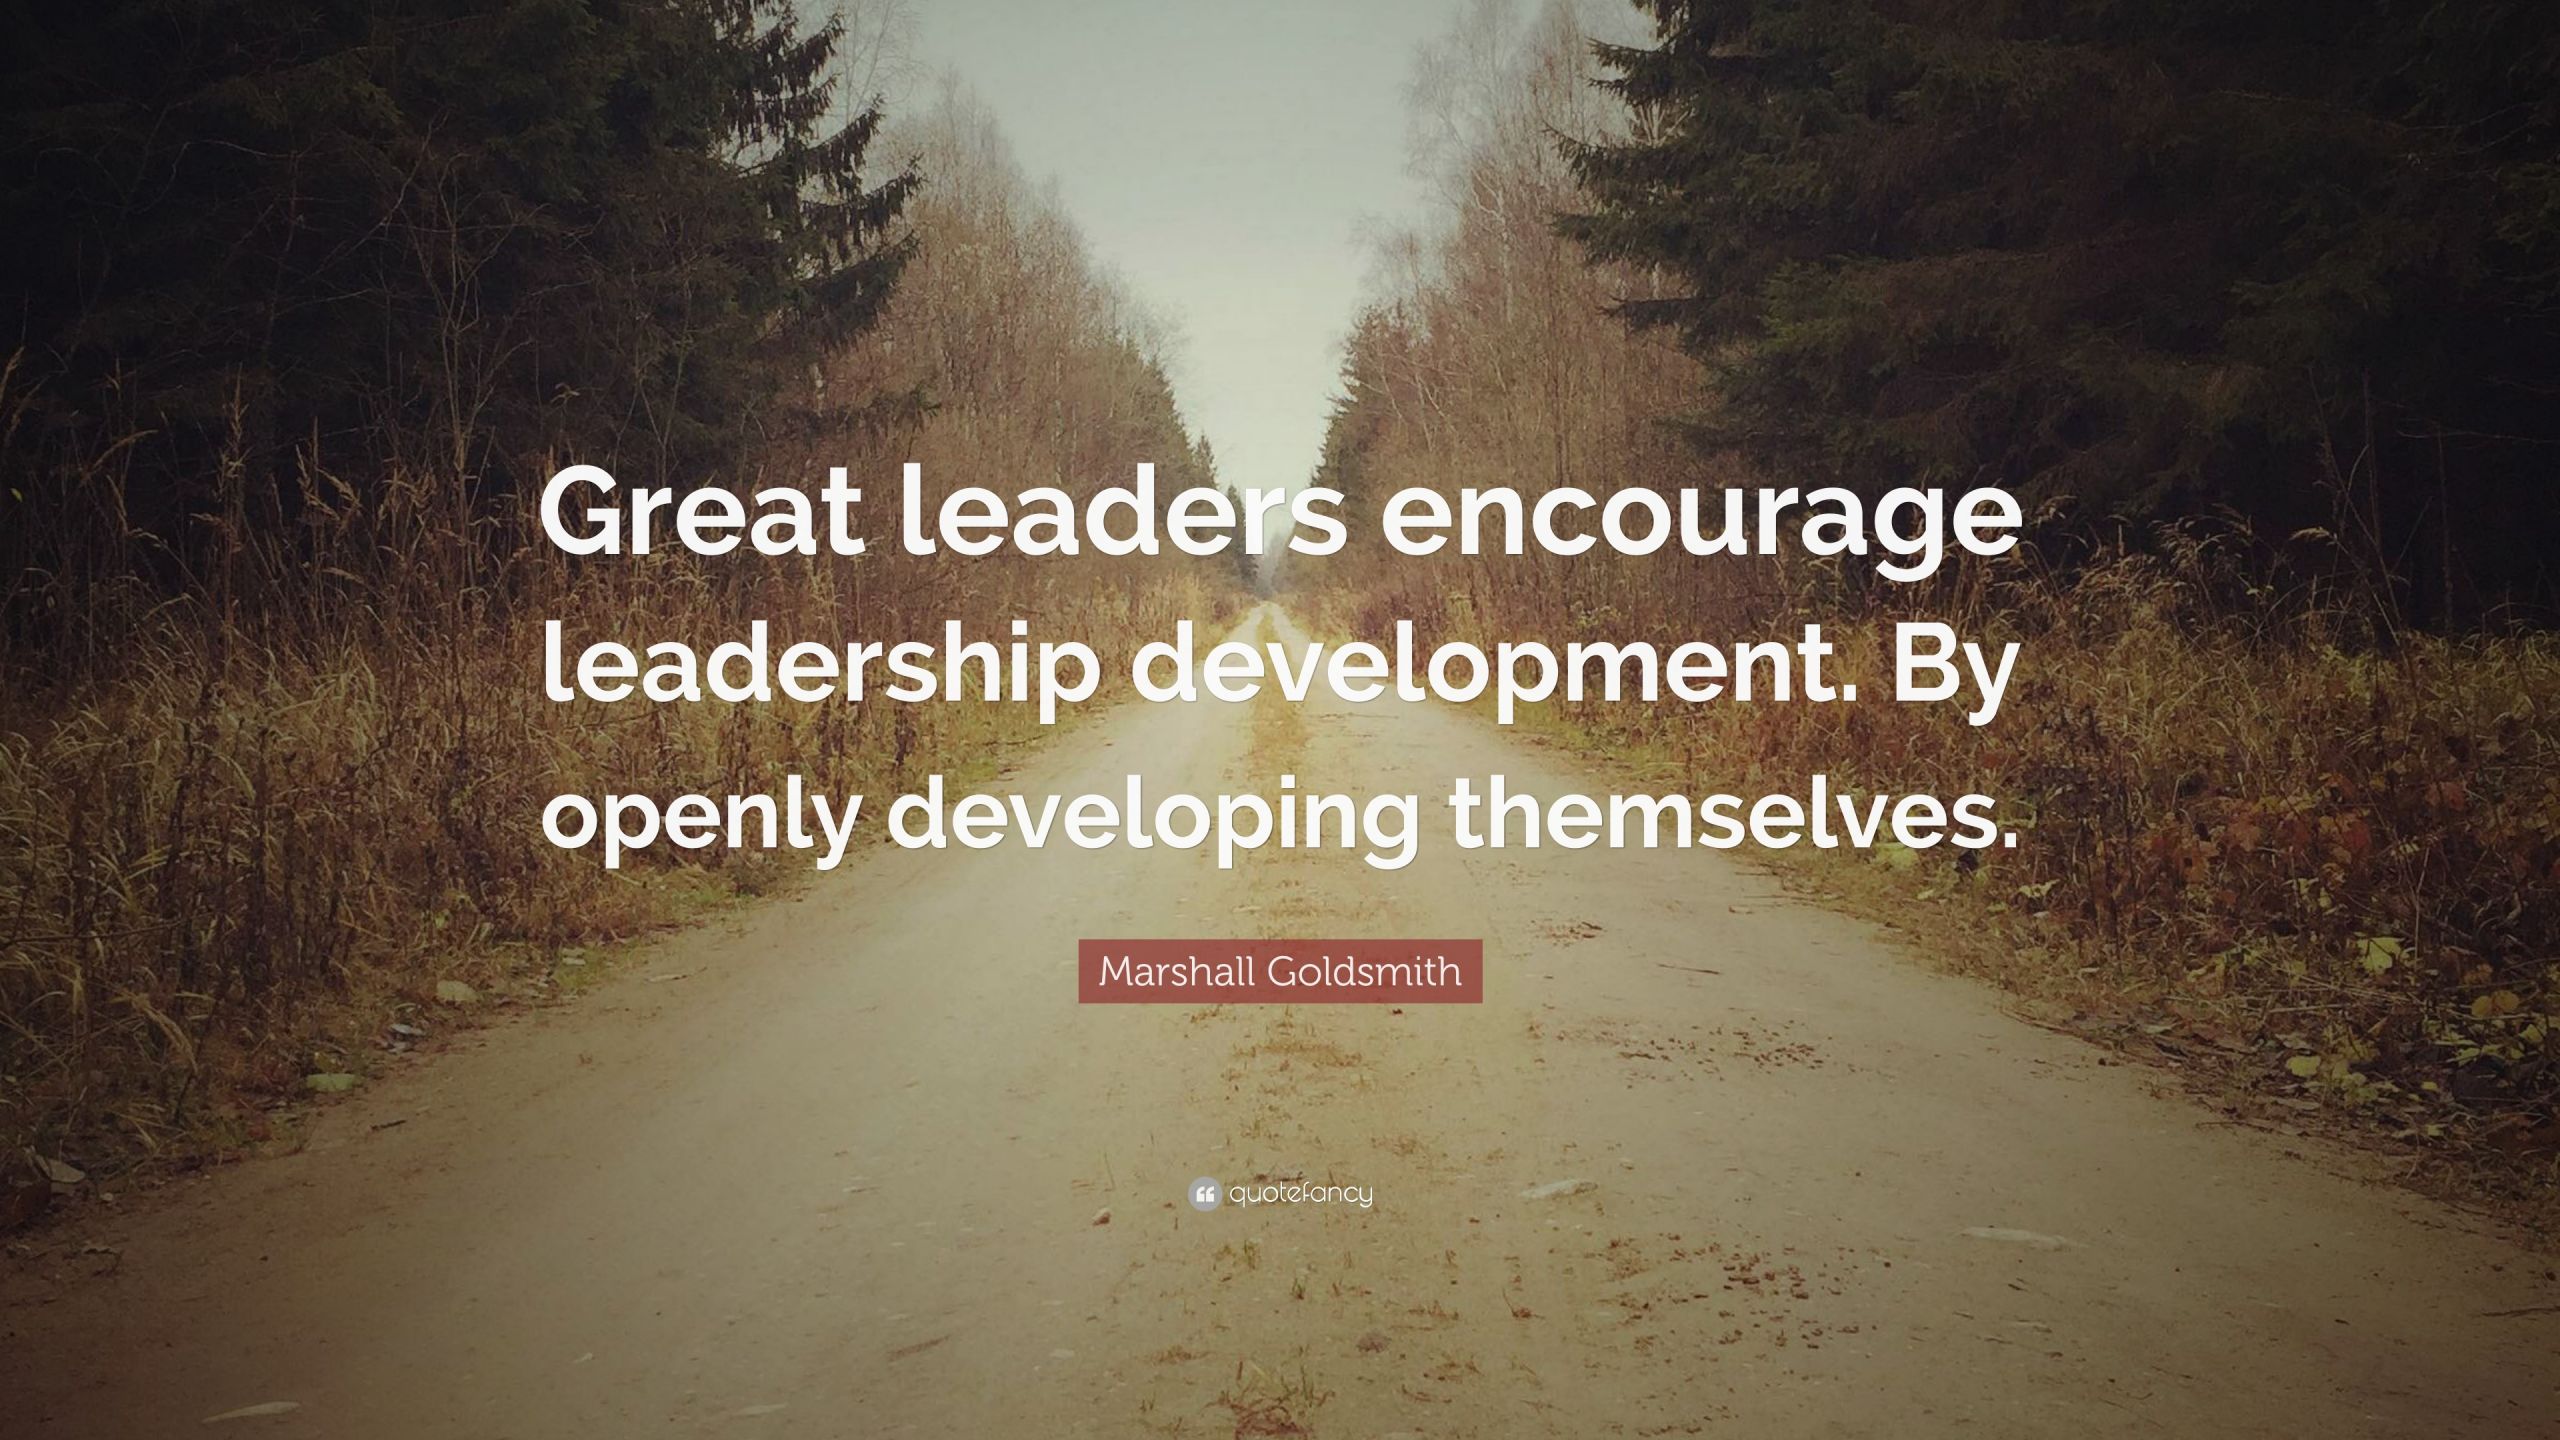 Leadership Development Quotes
 Marshall Goldsmith Quote “Great leaders encourage